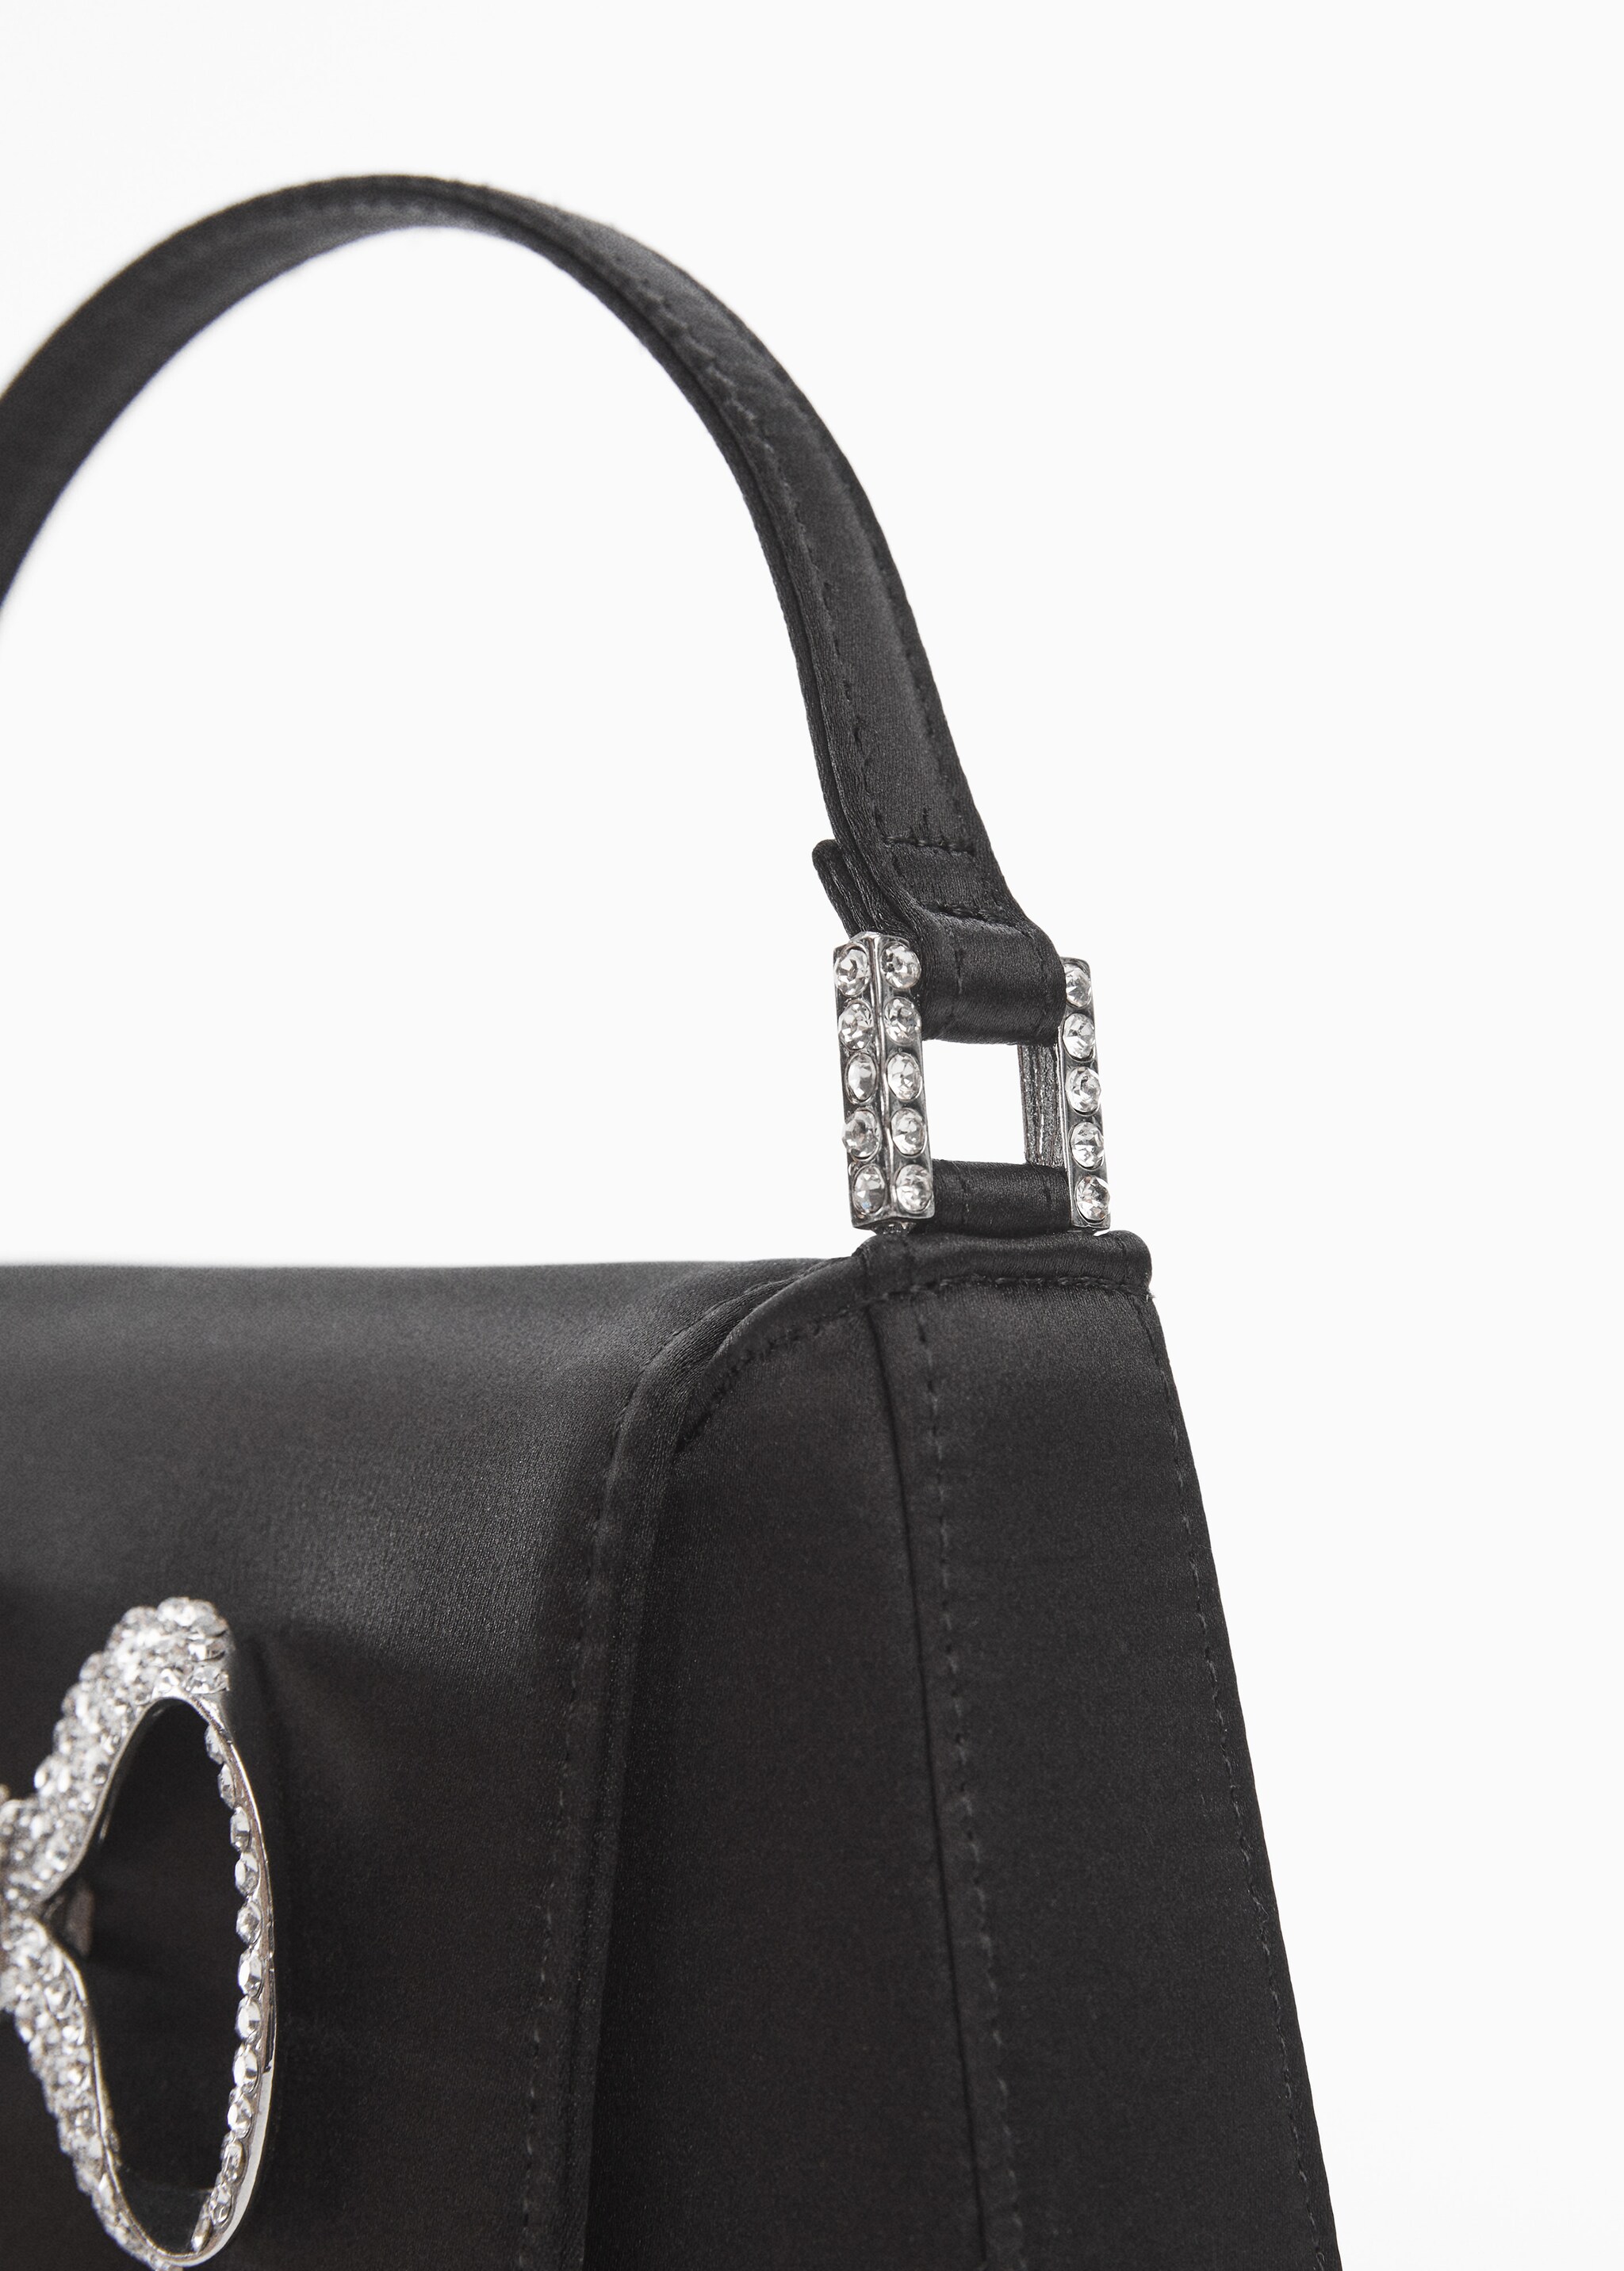 Rhinestone bag with flap and bow - Details of the article 3